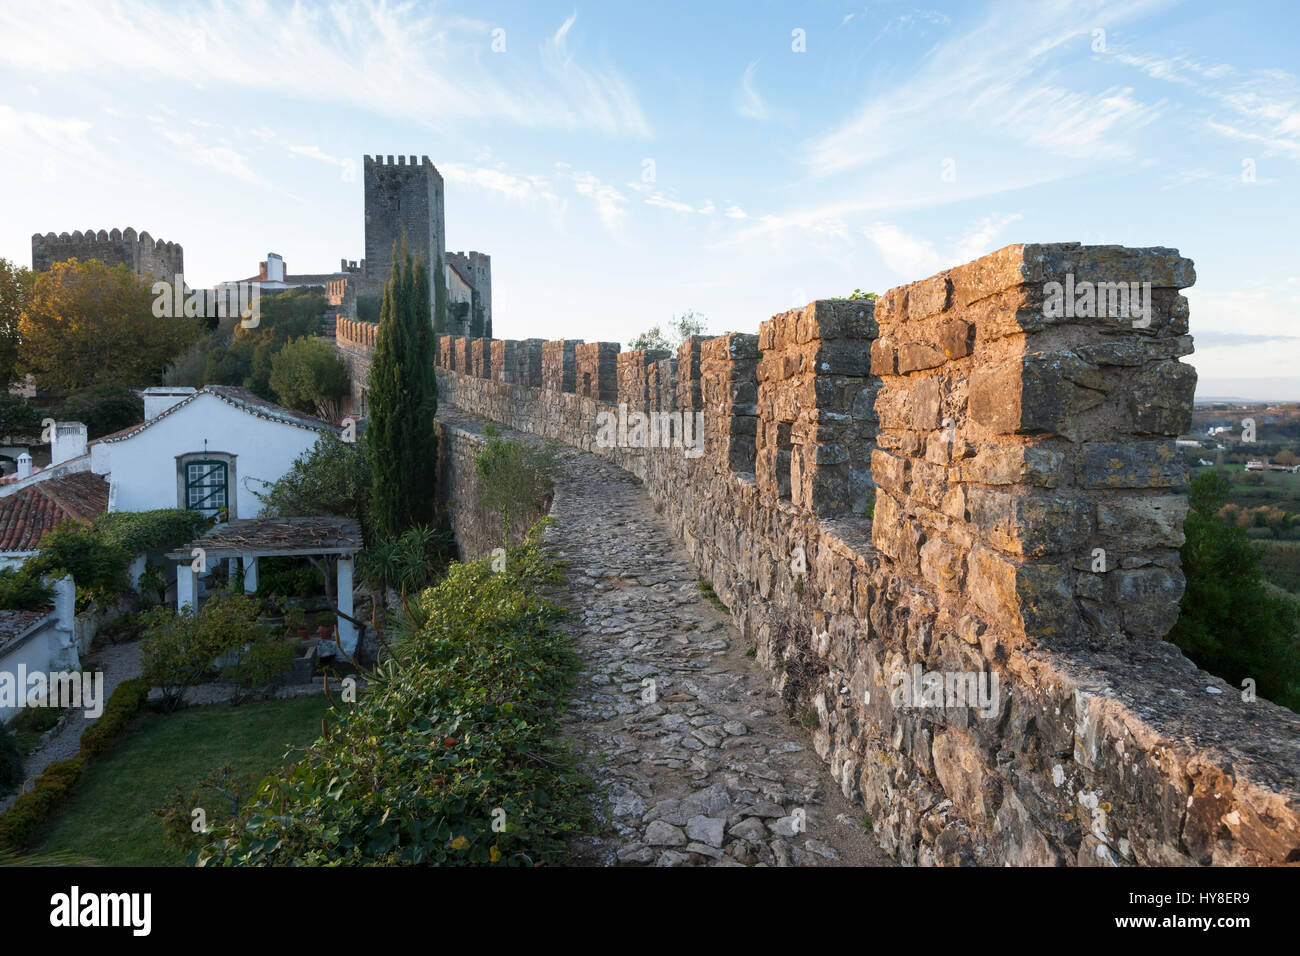 Óbidos, Portugal: Walkway along the fortified wall leading to the medieval Castle of Óbidos. Stock Photo